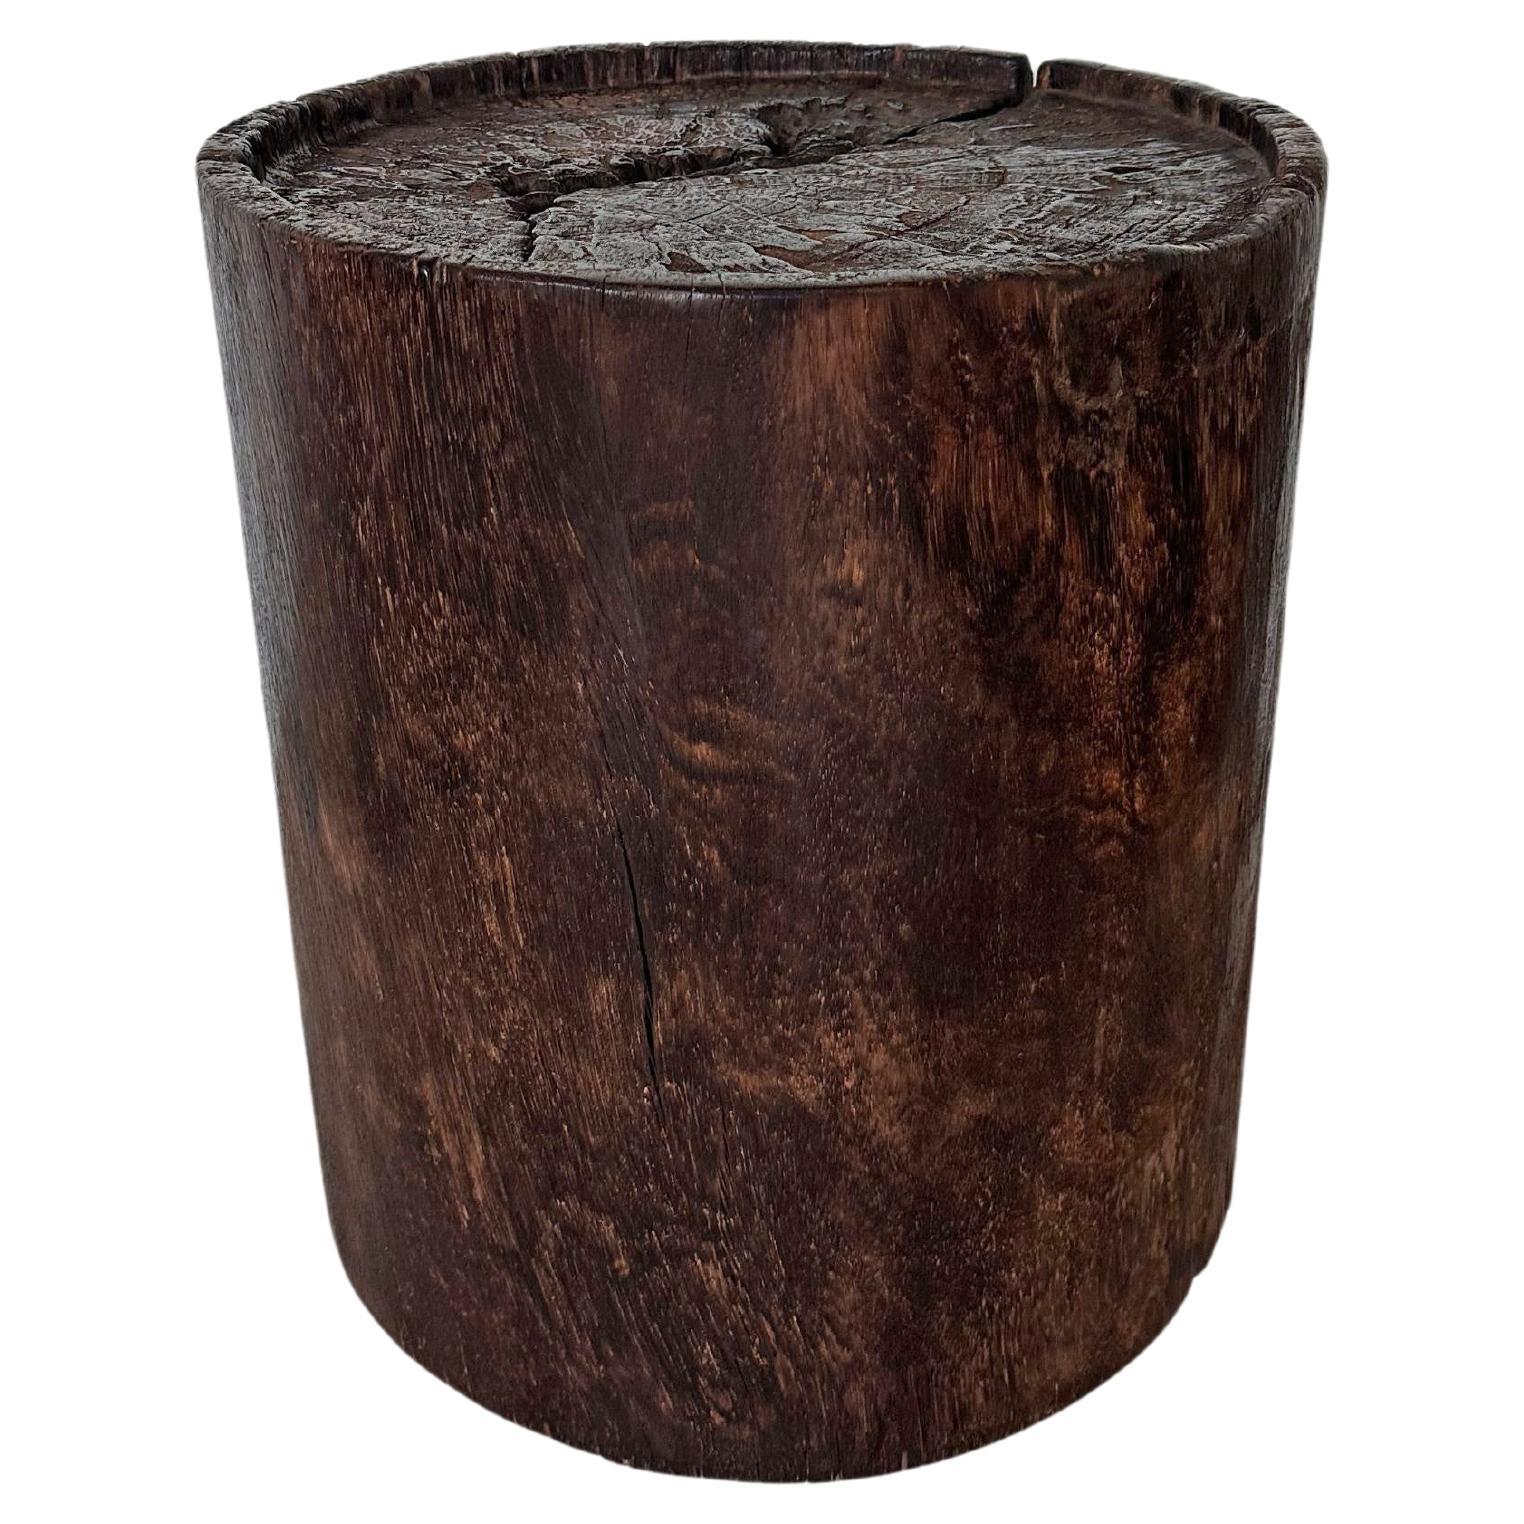 Solid Suar Wood Round Side Table Modern Organic For Sale